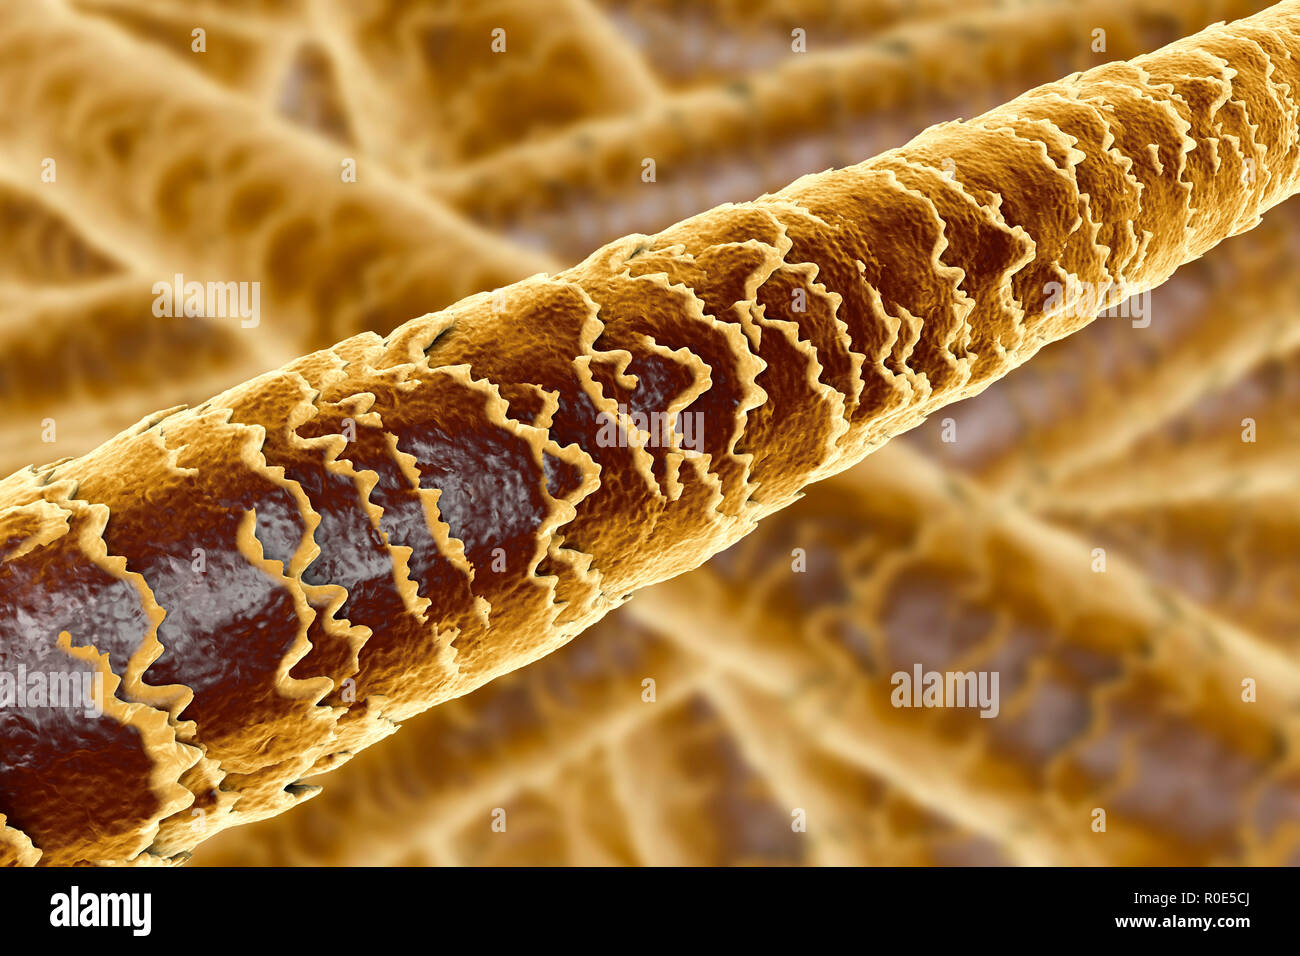 Human hair shafts, computer illustration. The outer layer of the hair shaft  (the cuticle) can be seen, with overlapping scales of dead cells. The  scales are thought to be important in preventing